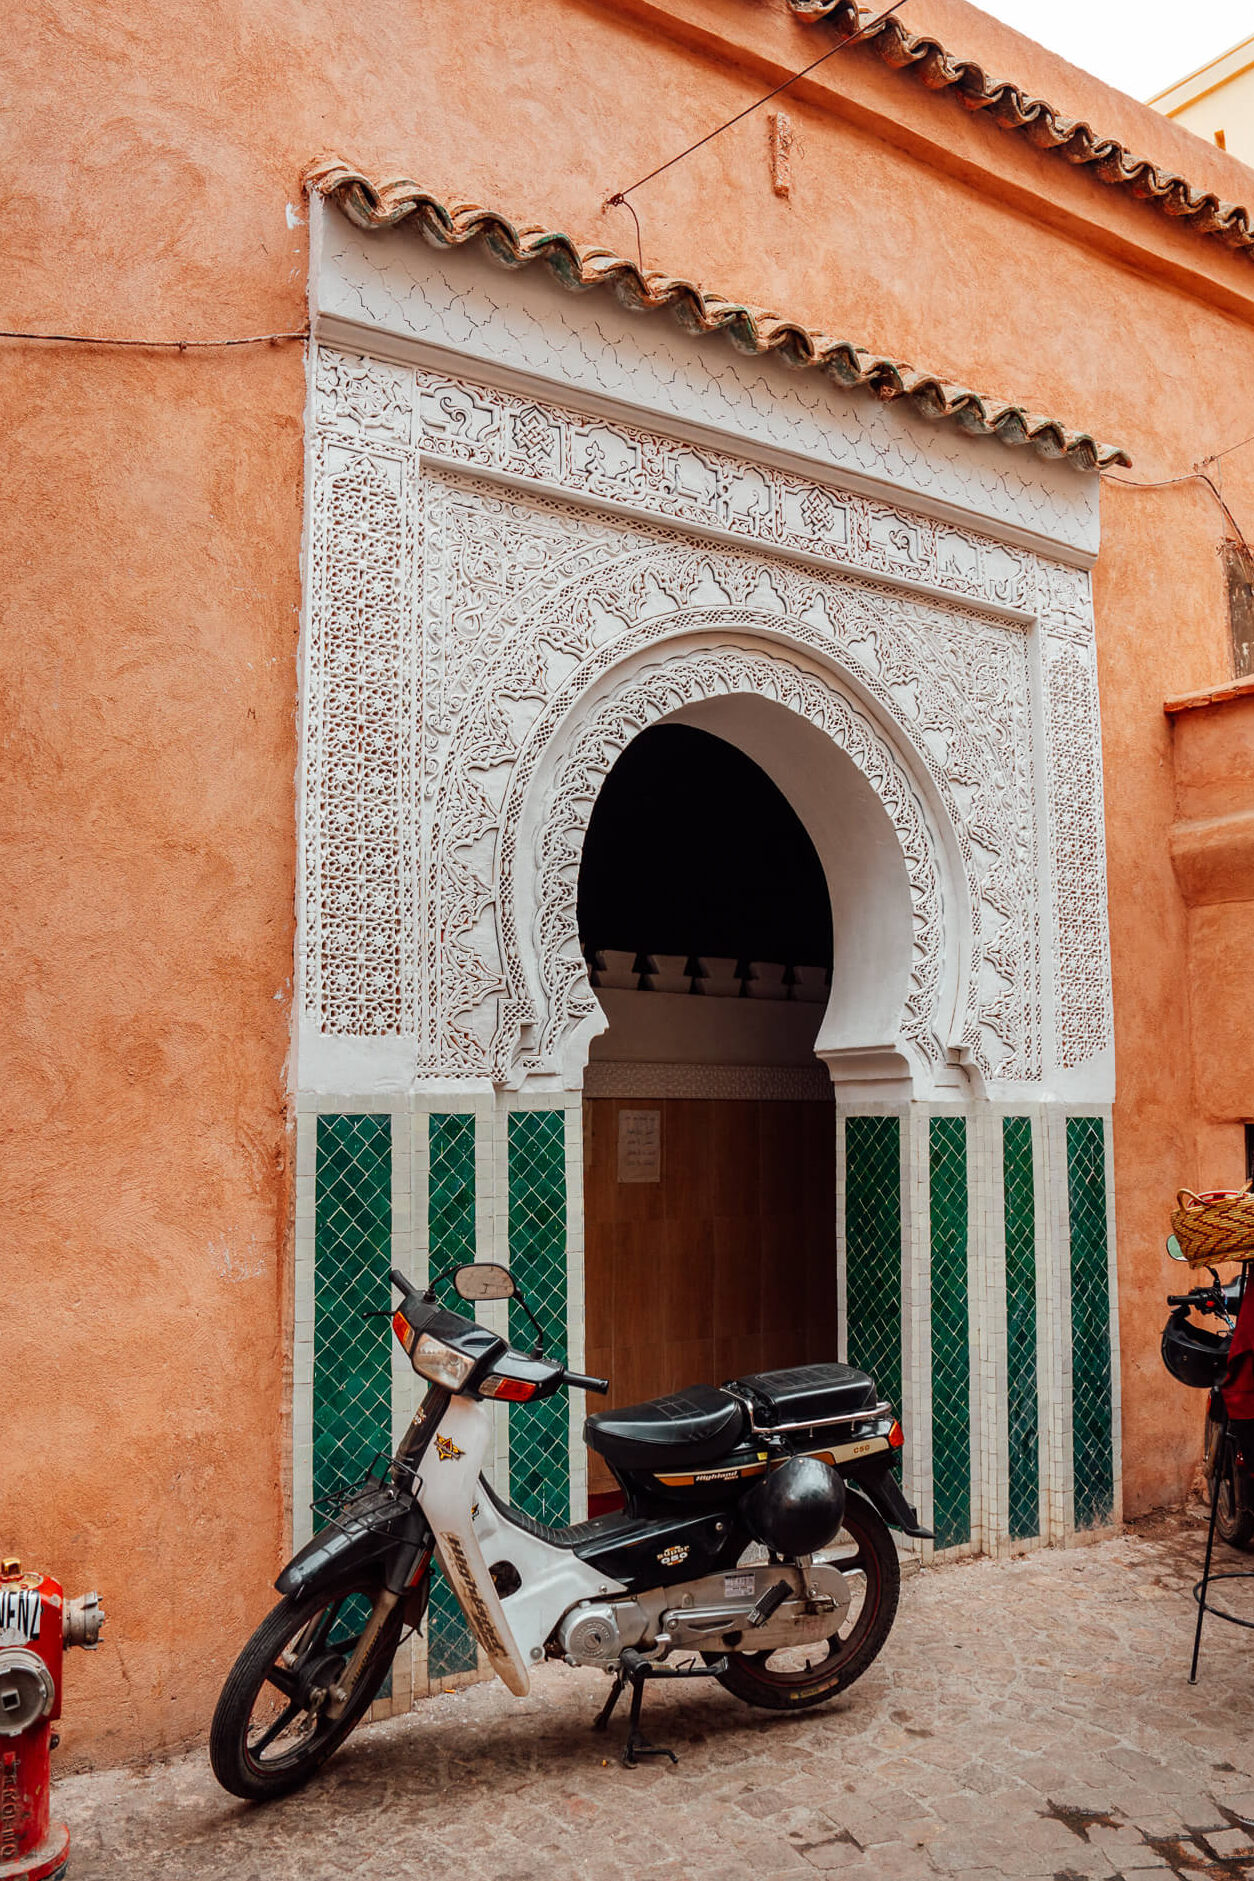 Tiled archway in Marrakech, Morocco